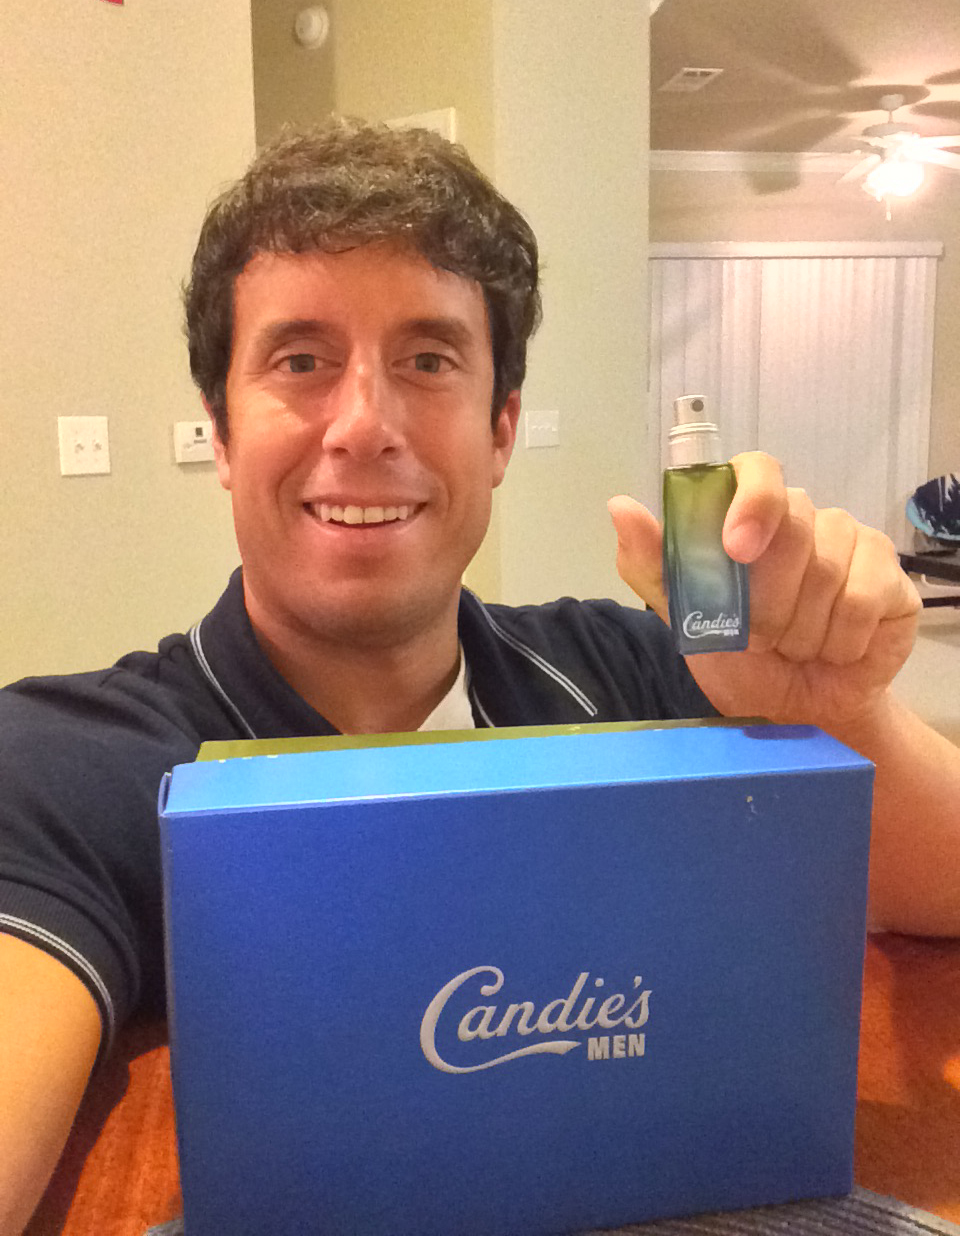 Here I am holding a nearly empty bottle of my cologne while sitting behind one of the boxes that was shipped to me.